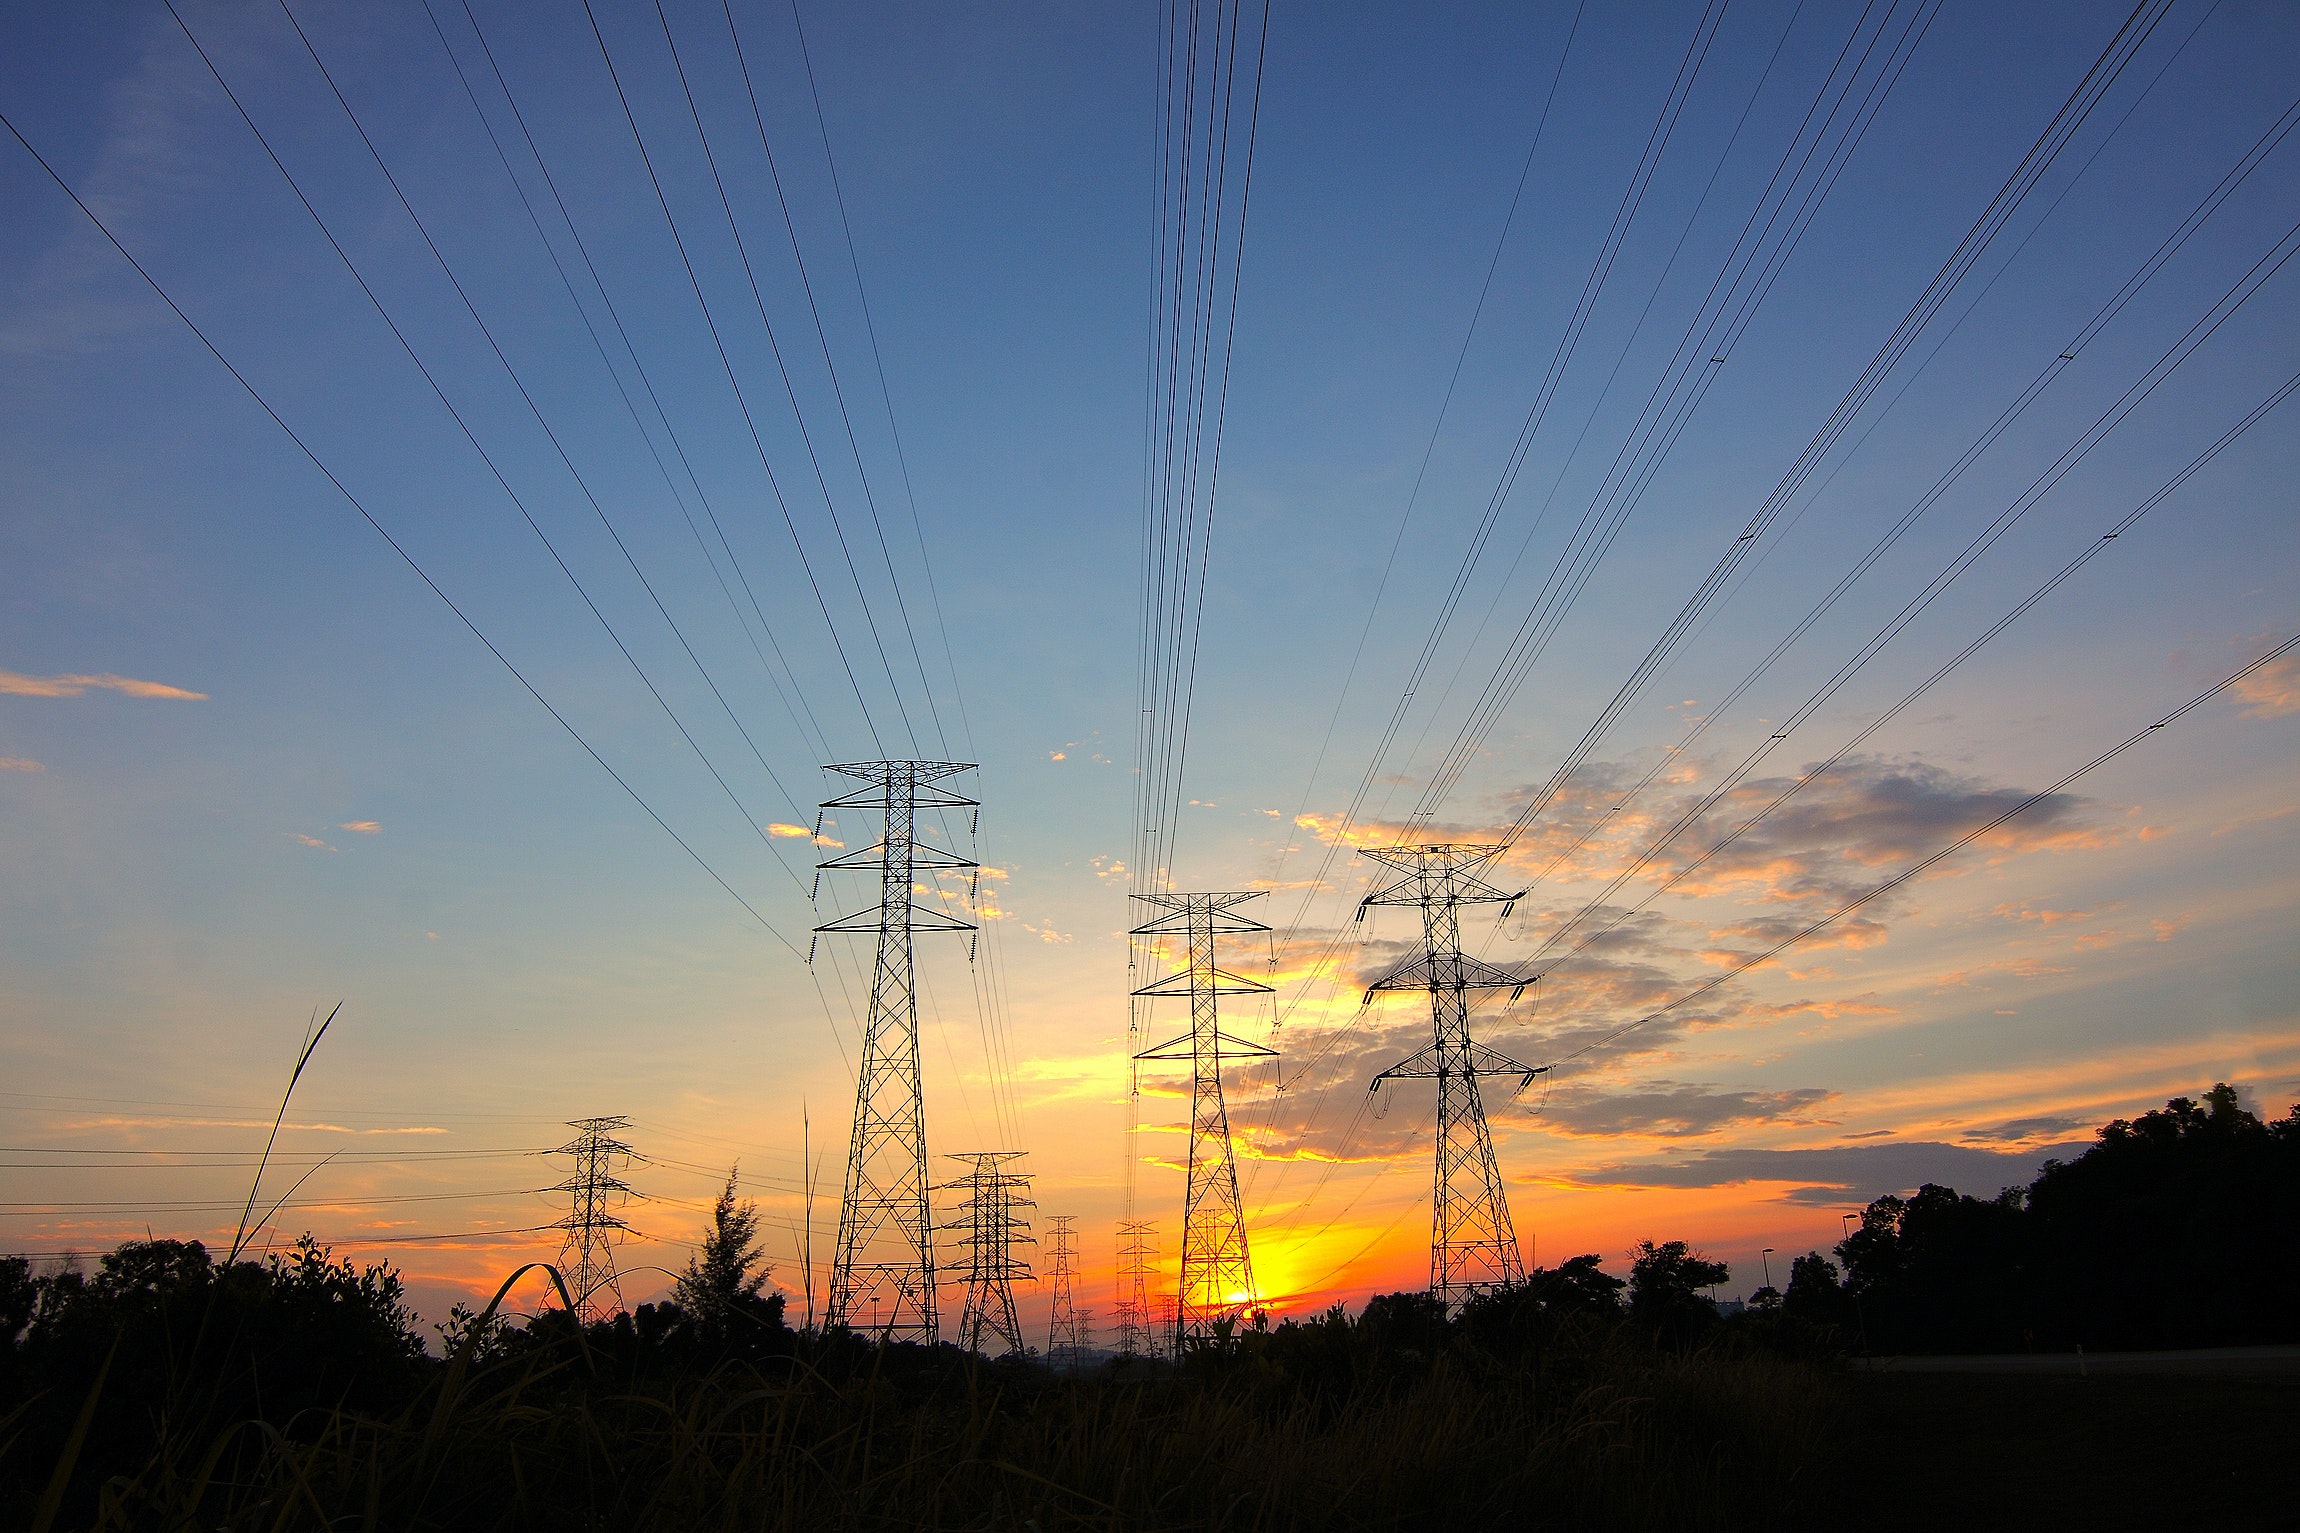 Image of power lines at sunset